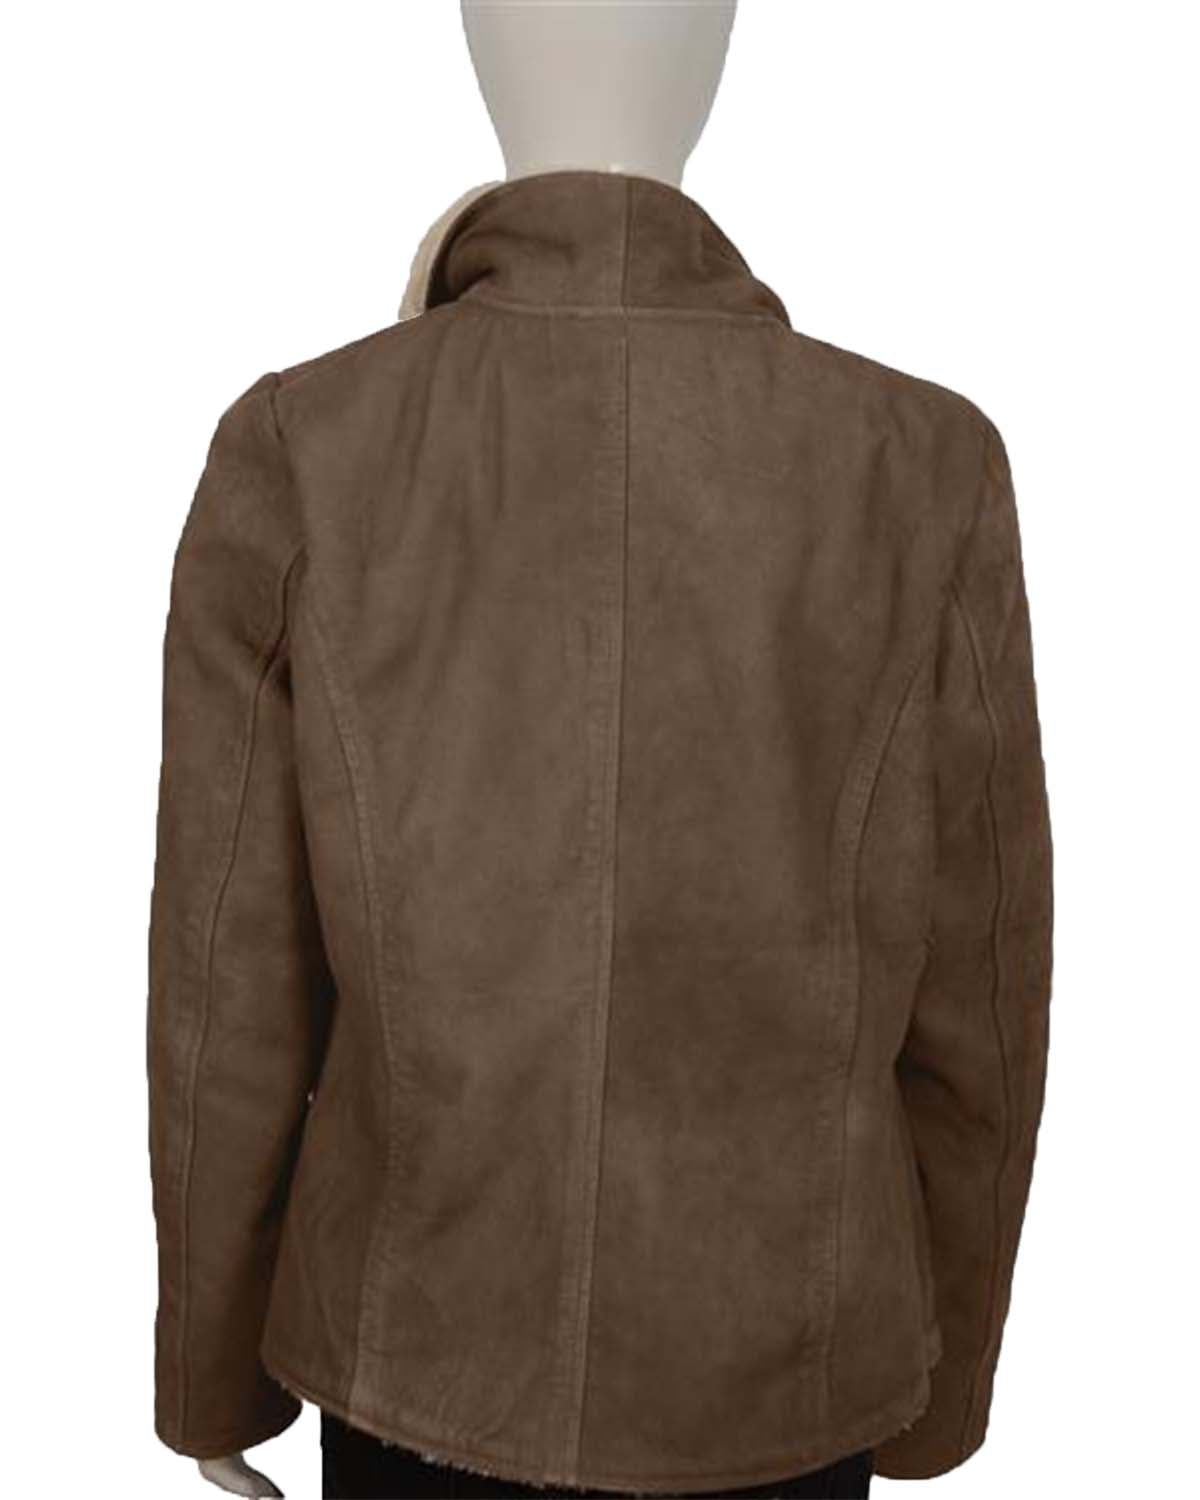 Yellowstone Drape Front Suede Leather Jacket With Fur